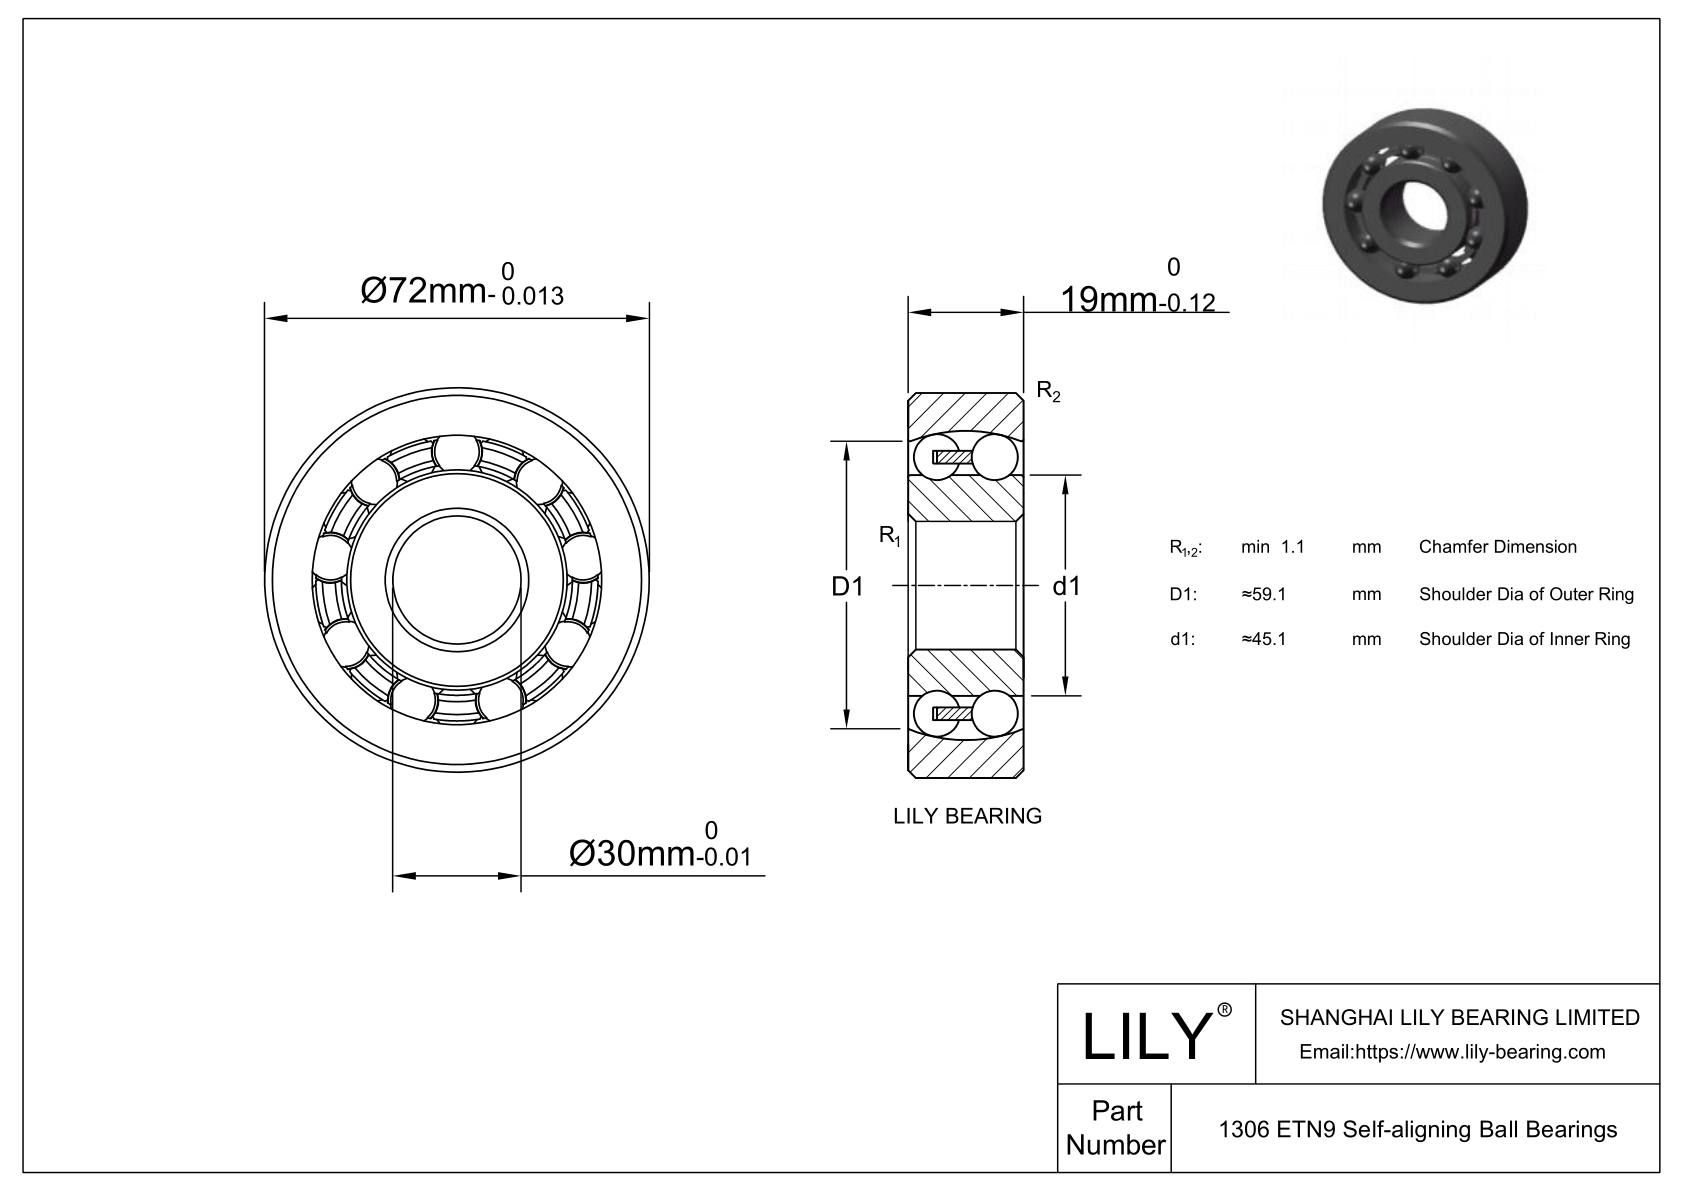 S1306 ETN9 Stainless Steel Self Aligning Ball Bearings cad drawing